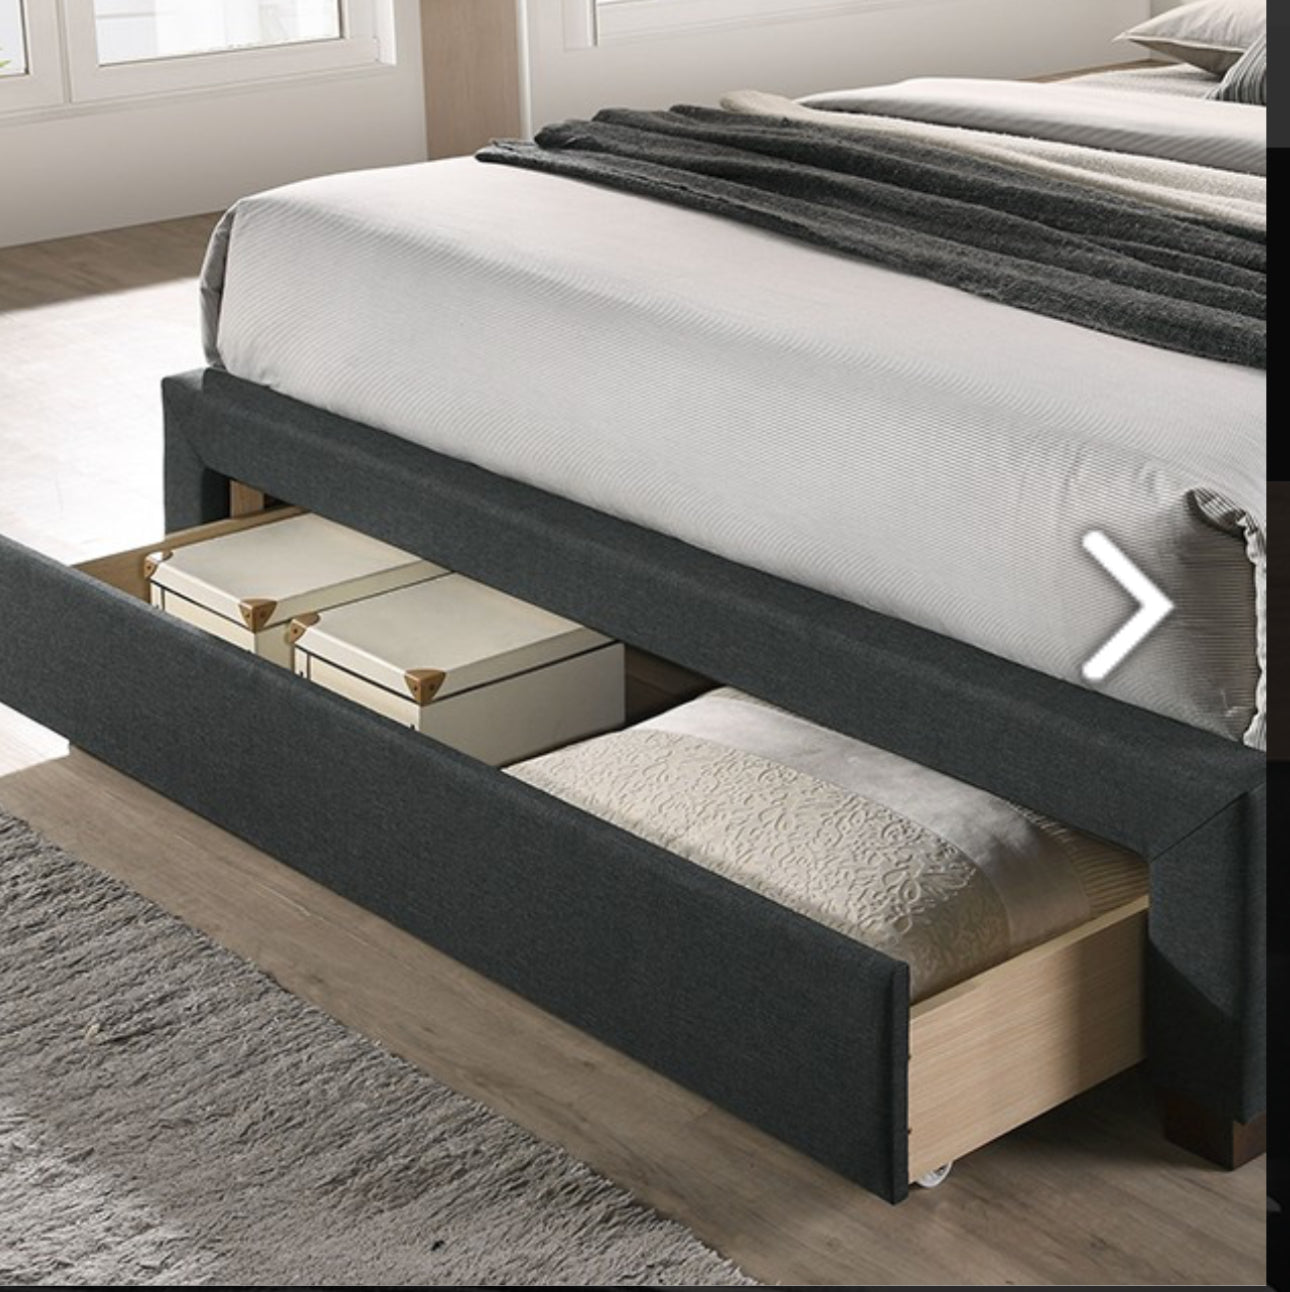 QUEEN BED FRAME WITH STORAGE